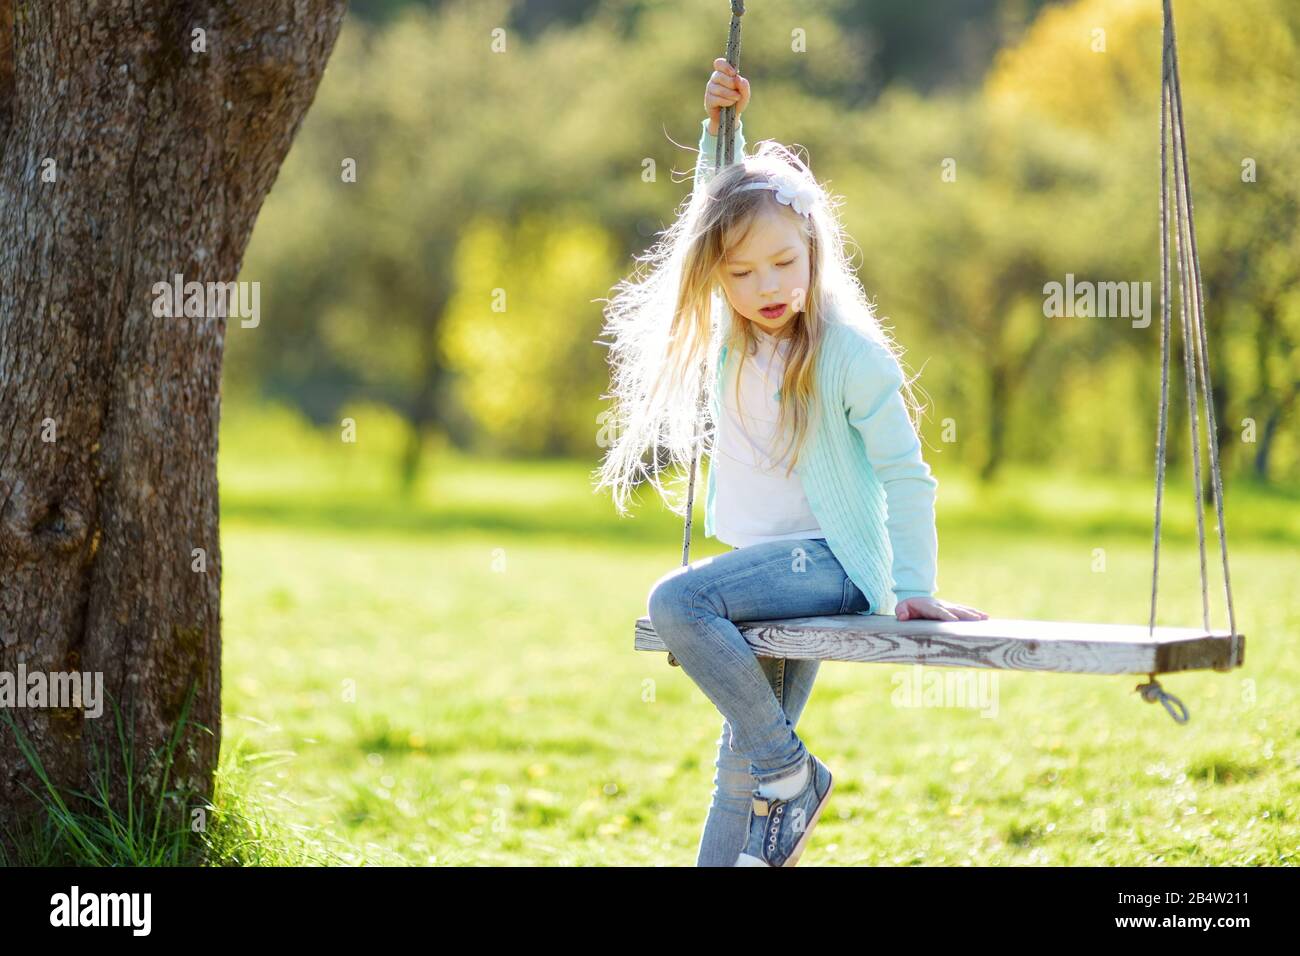 Cute little girl having fun on a swing outdoors in summer garden. Summer leisure for small kids. Stock Photo